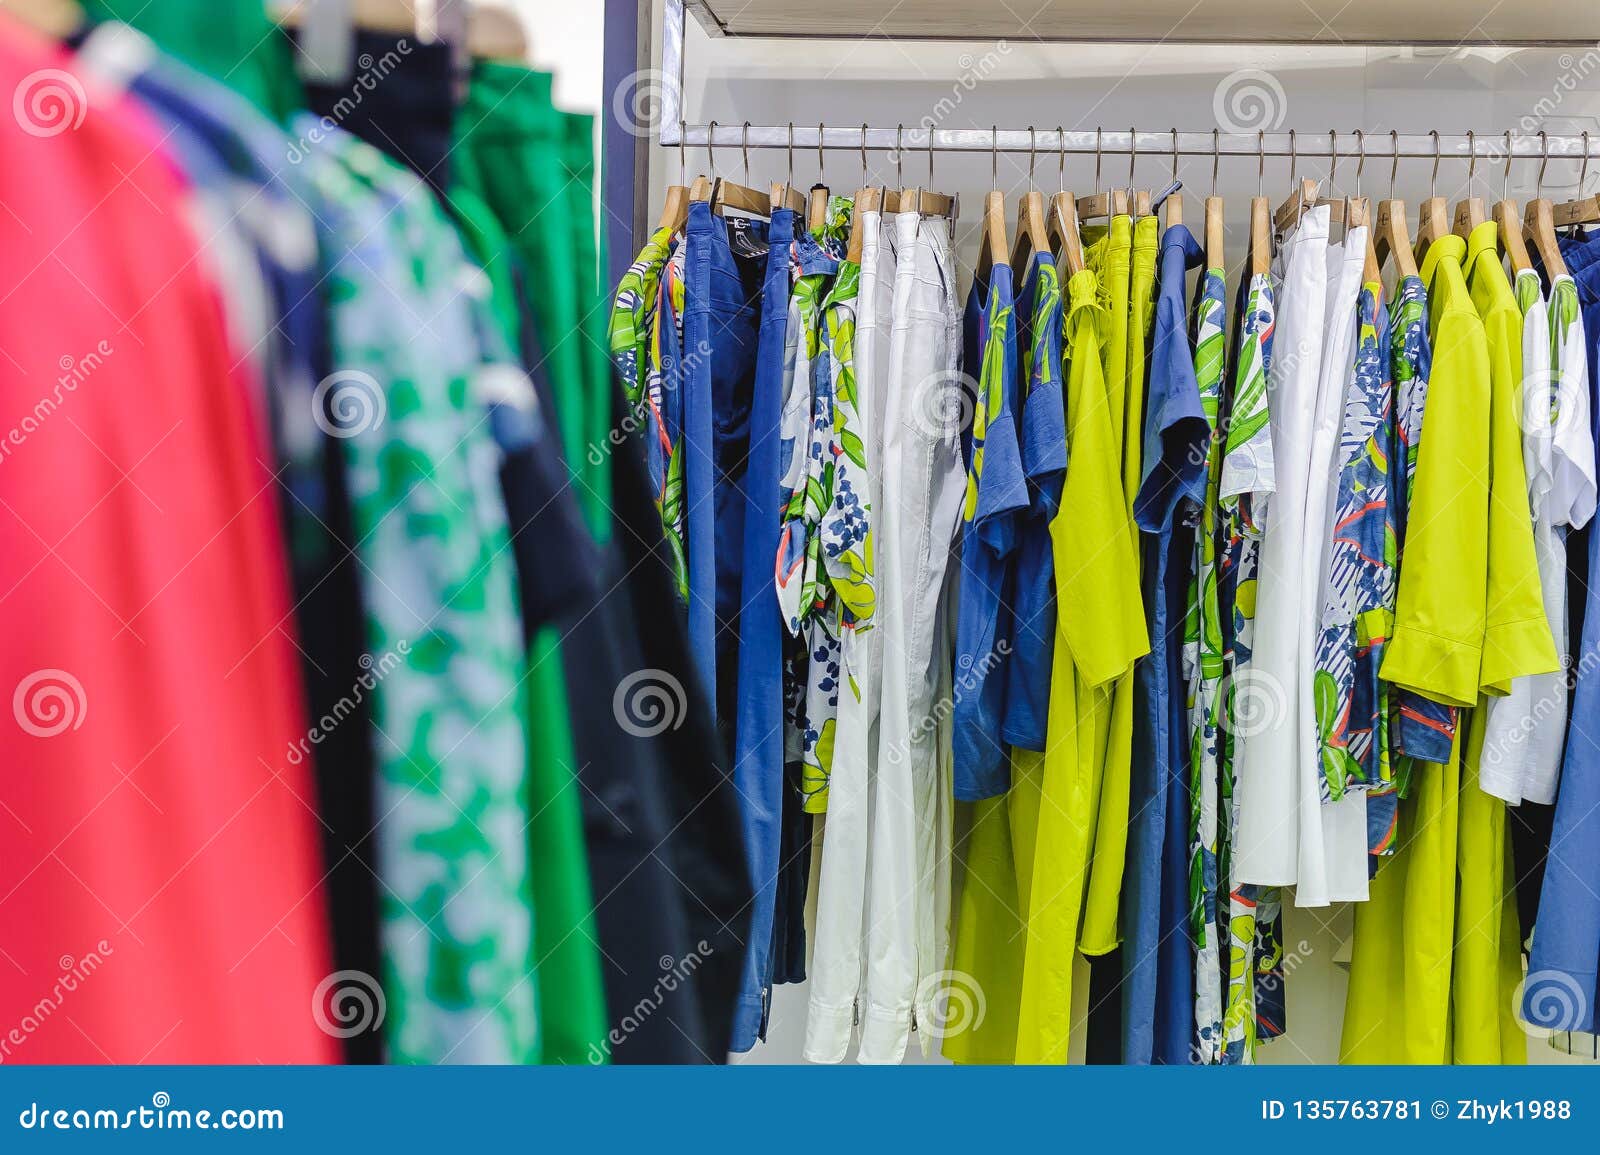 Outfits in a Women`s Clothing Store in a Shopping Center Stock Image ...